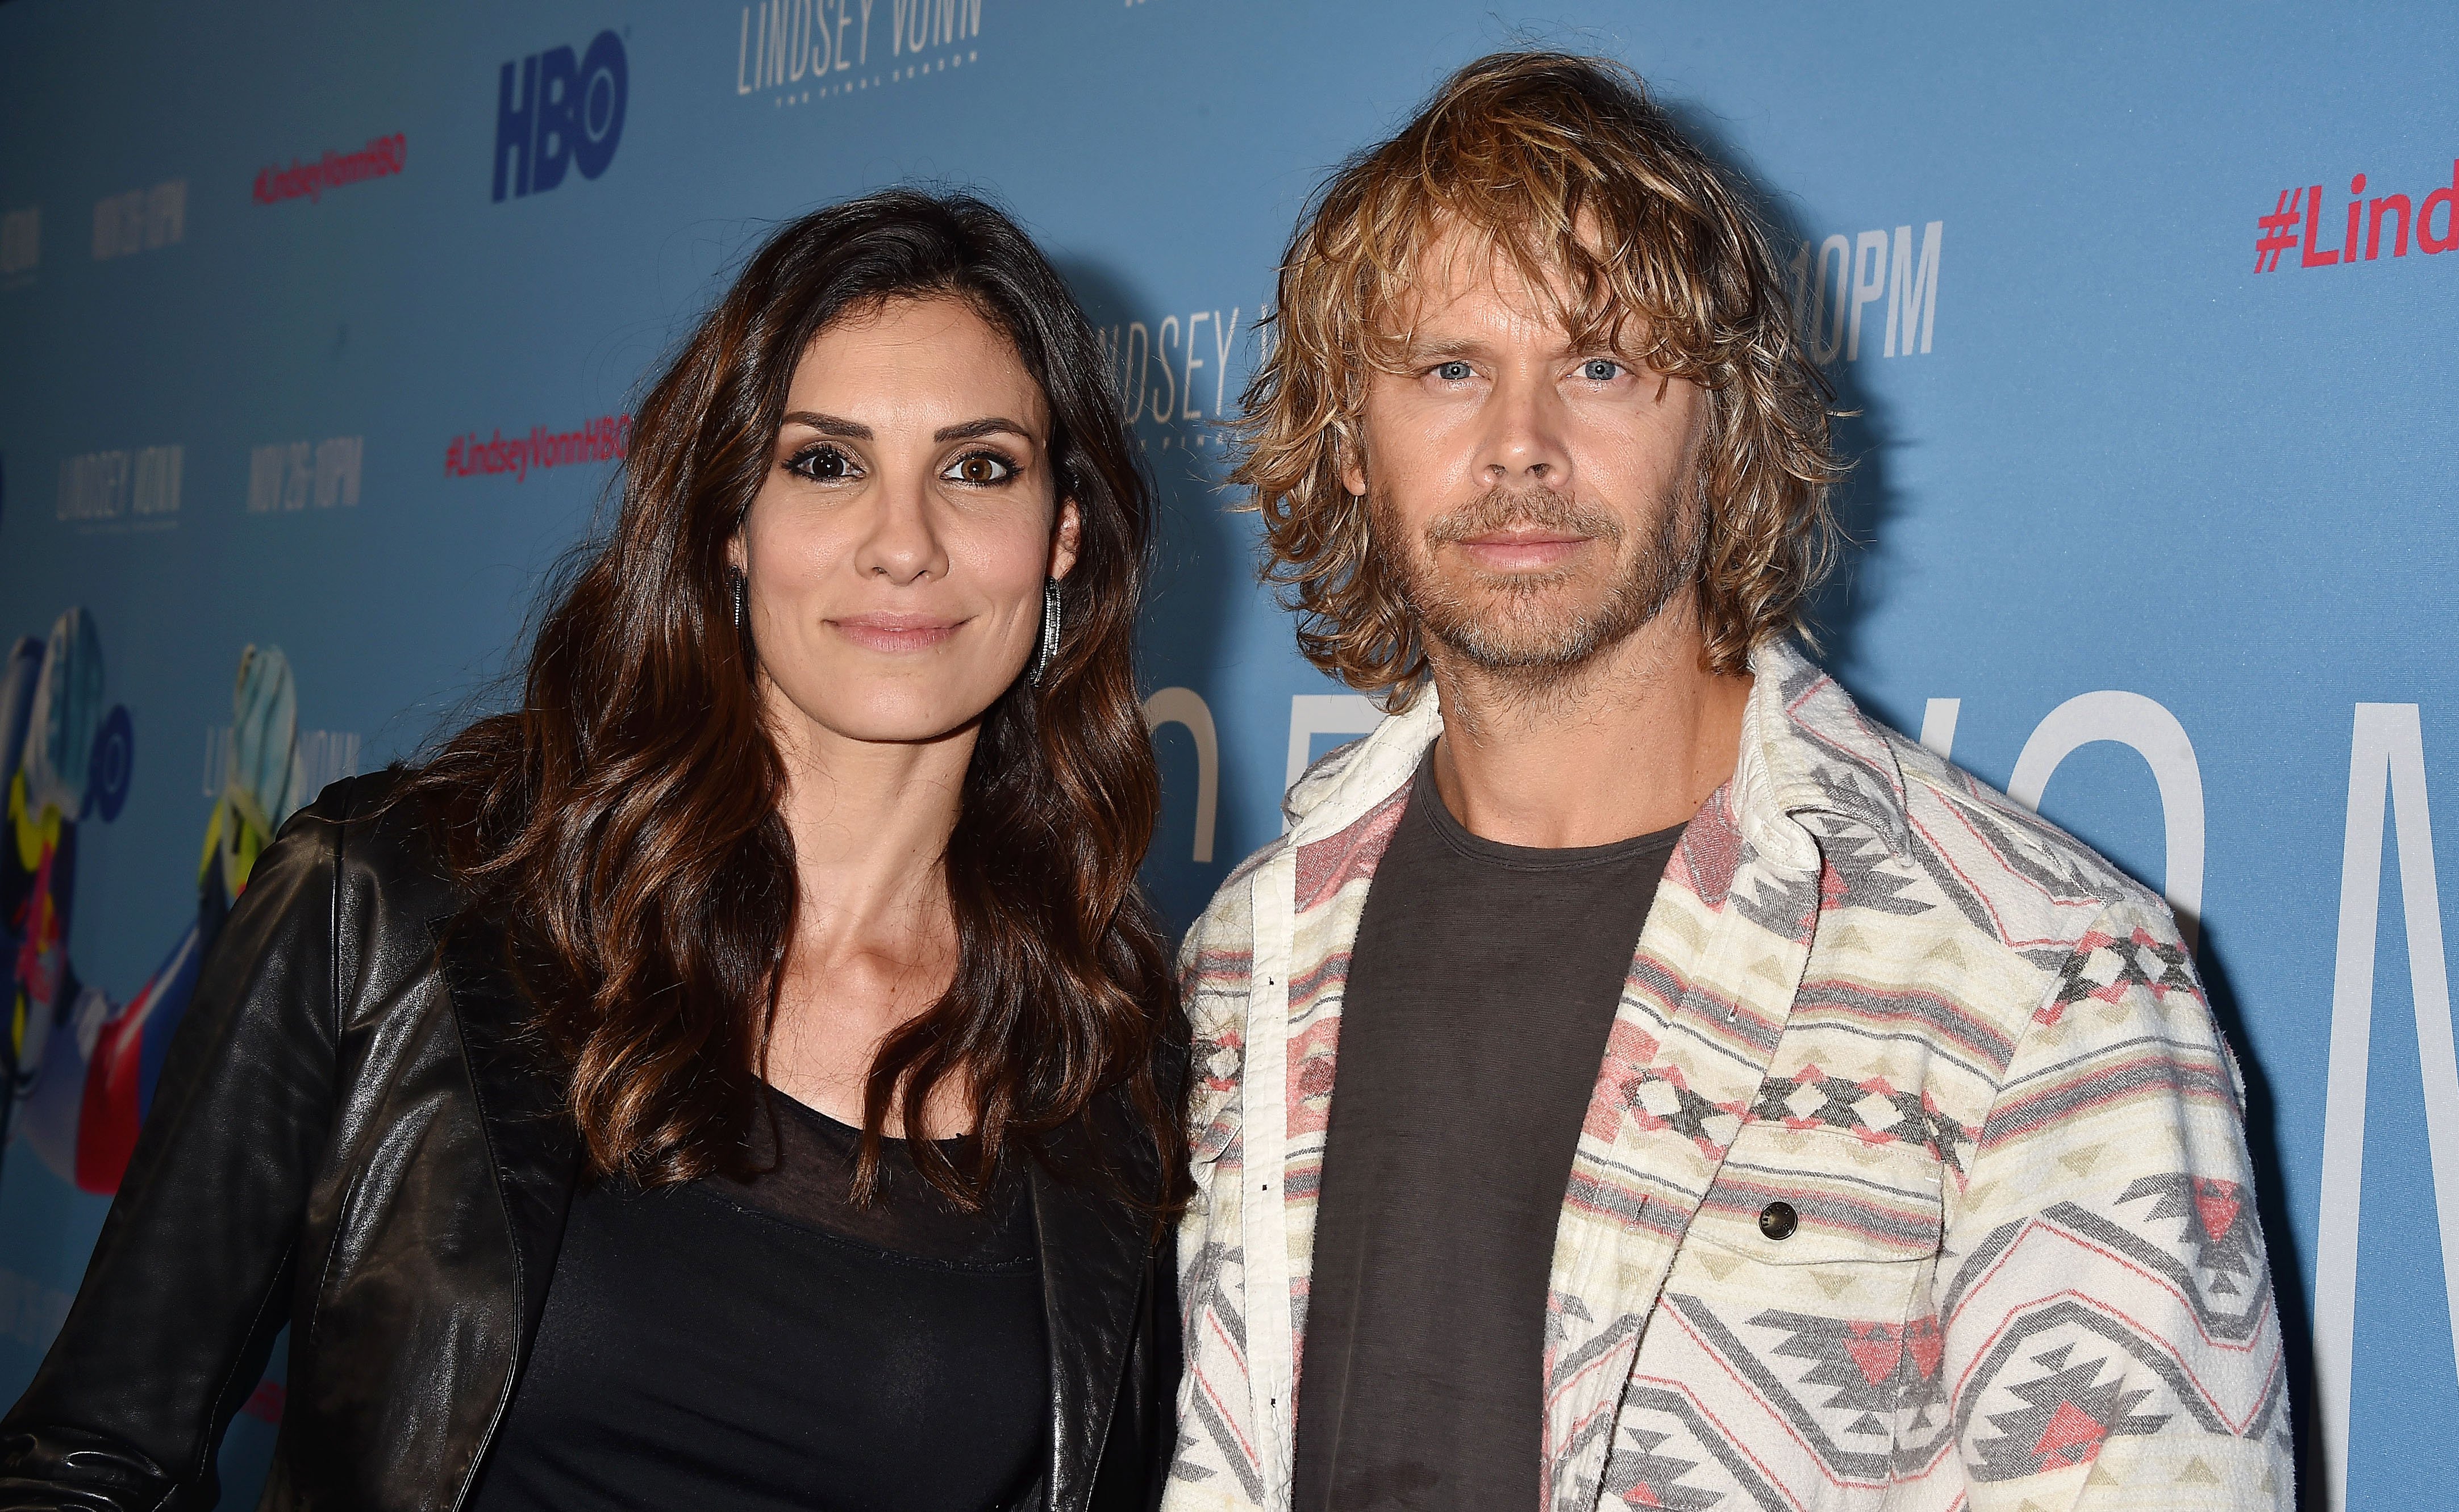 Daniela Ruah (L) and Eric Christian Olsen attend the premiere of HBO's "Lindsey Vonn: The Final Season" at Writers Guild Theater on November 07, 2019 in Beverly Hills, California. | Photo: Getty Images